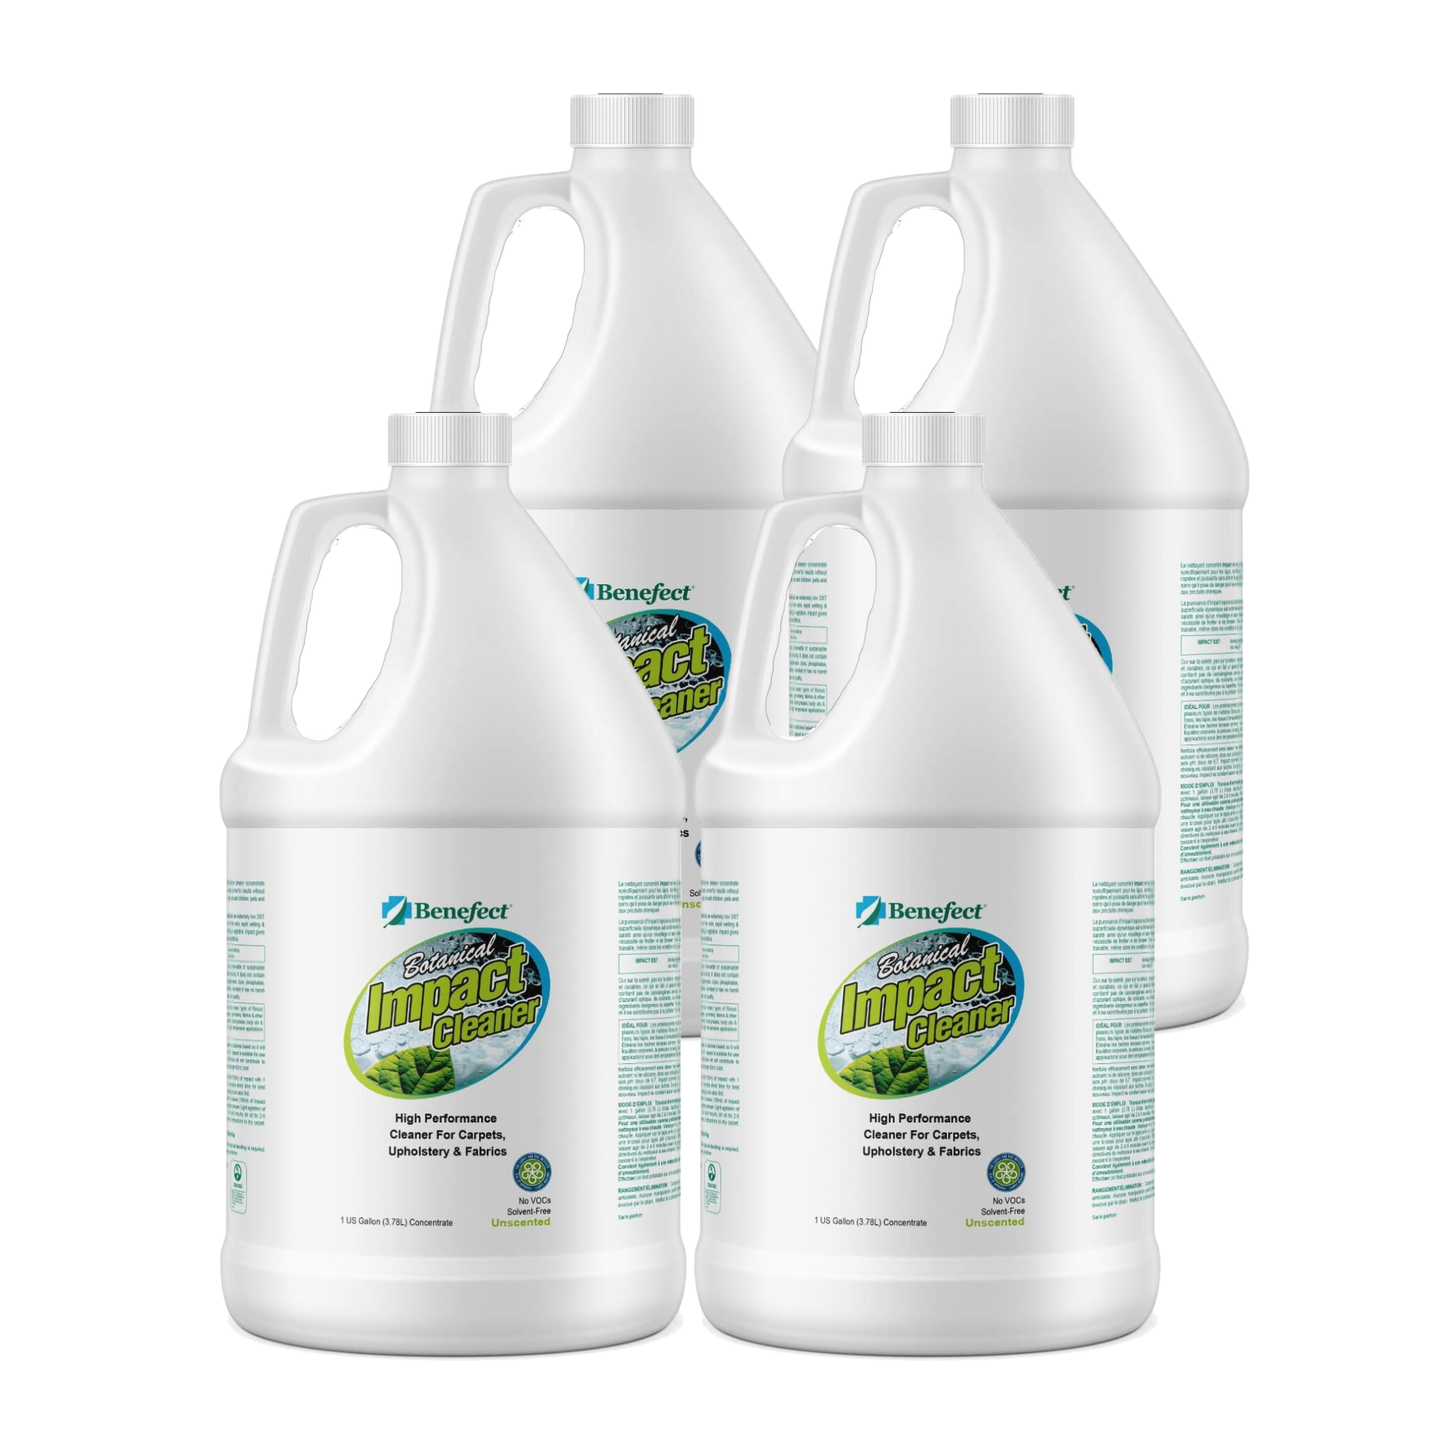 Benefect Impact Carpet & Fabric Cleaner Misc 4 gal